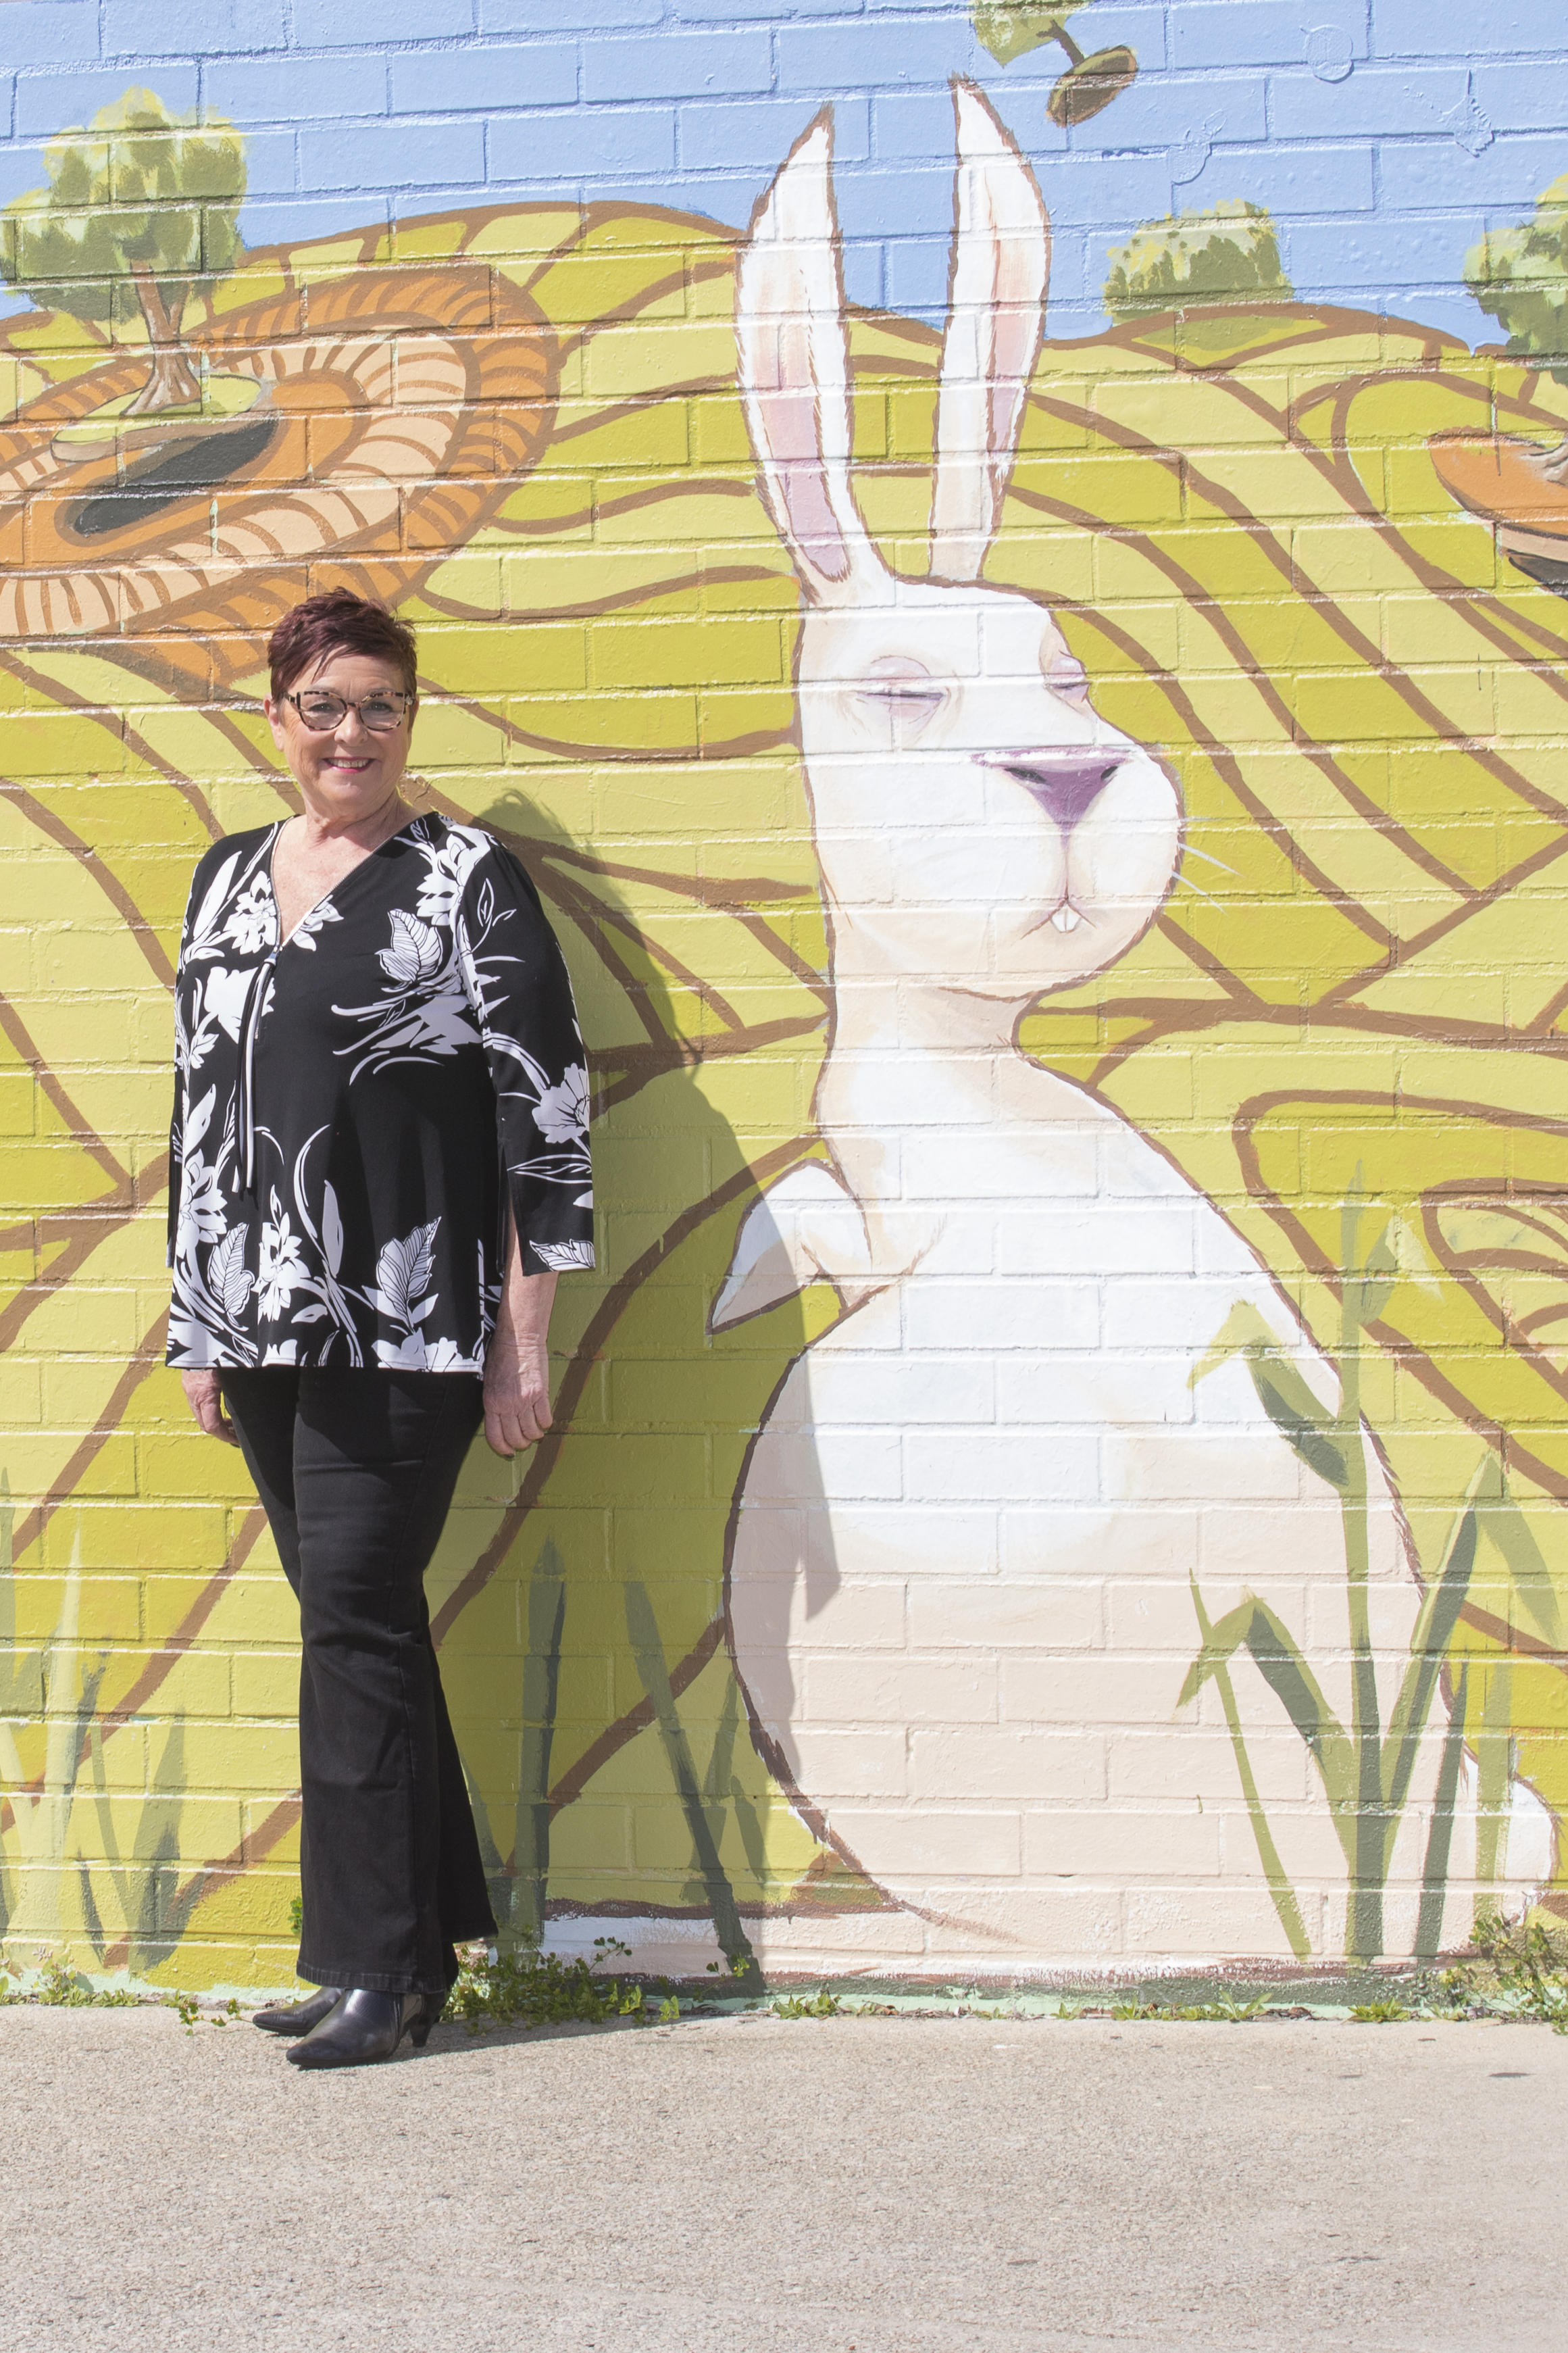 Lisa Baker MLA infront of wall with street art, of stylised rabbit and green artistic background